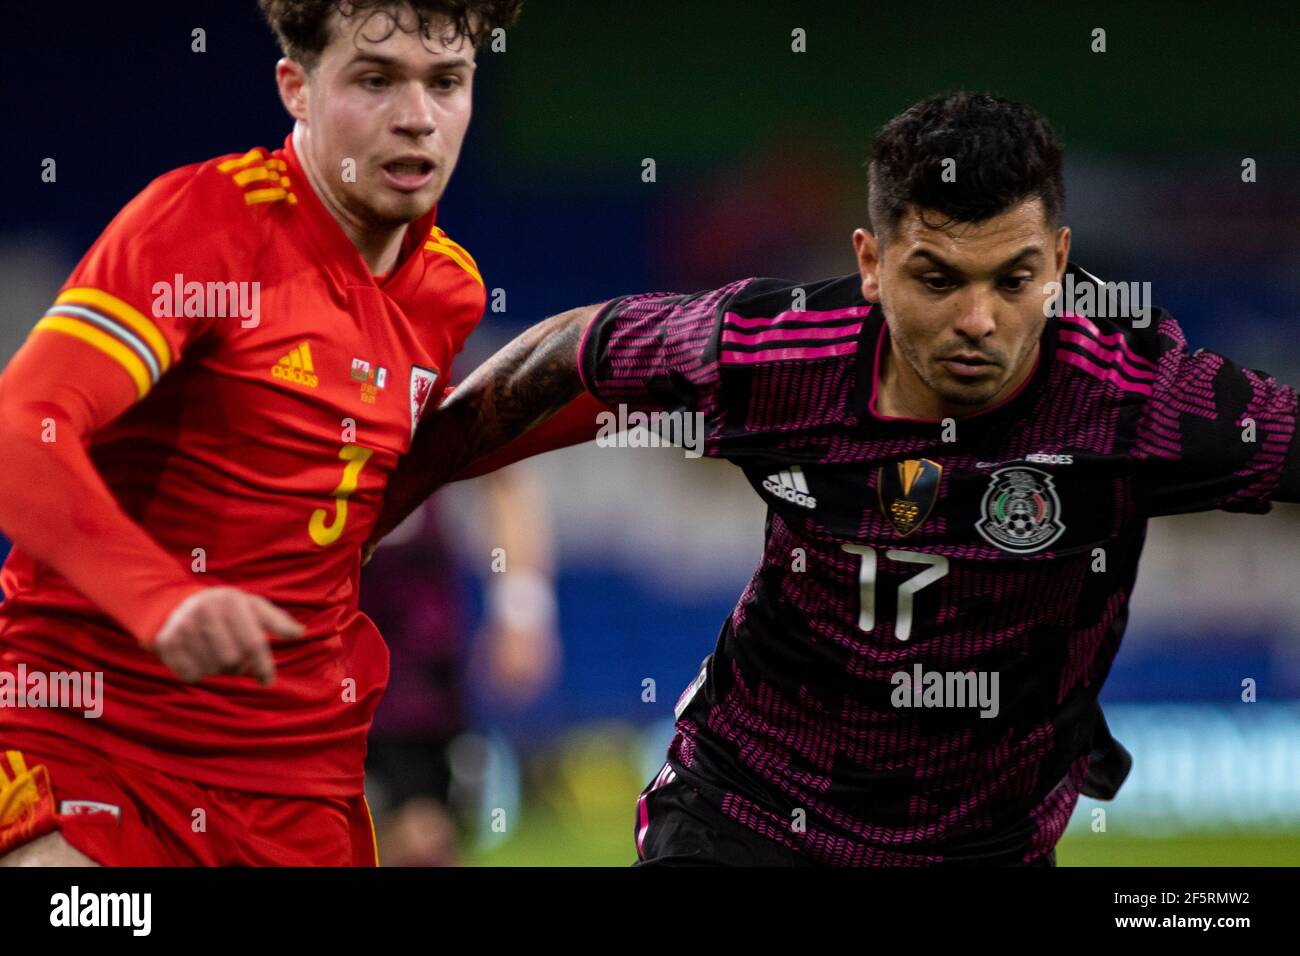 Cardiff, UK. 27th Mar, 2021. Jesús Manuel Corona of Mexico (R) in action against Neco Williams of Wales (L) Football international friendly match, Wales v Mexico, at the Cardiff city stadium in Cardiff, South Wales on Saturday 27th March 2021. Editorial use only. pic by Lewis Mitchell/Andrew Orchard sports photography/Alamy Live News Credit: Andrew Orchard sports photography/Alamy Live News Stock Photo